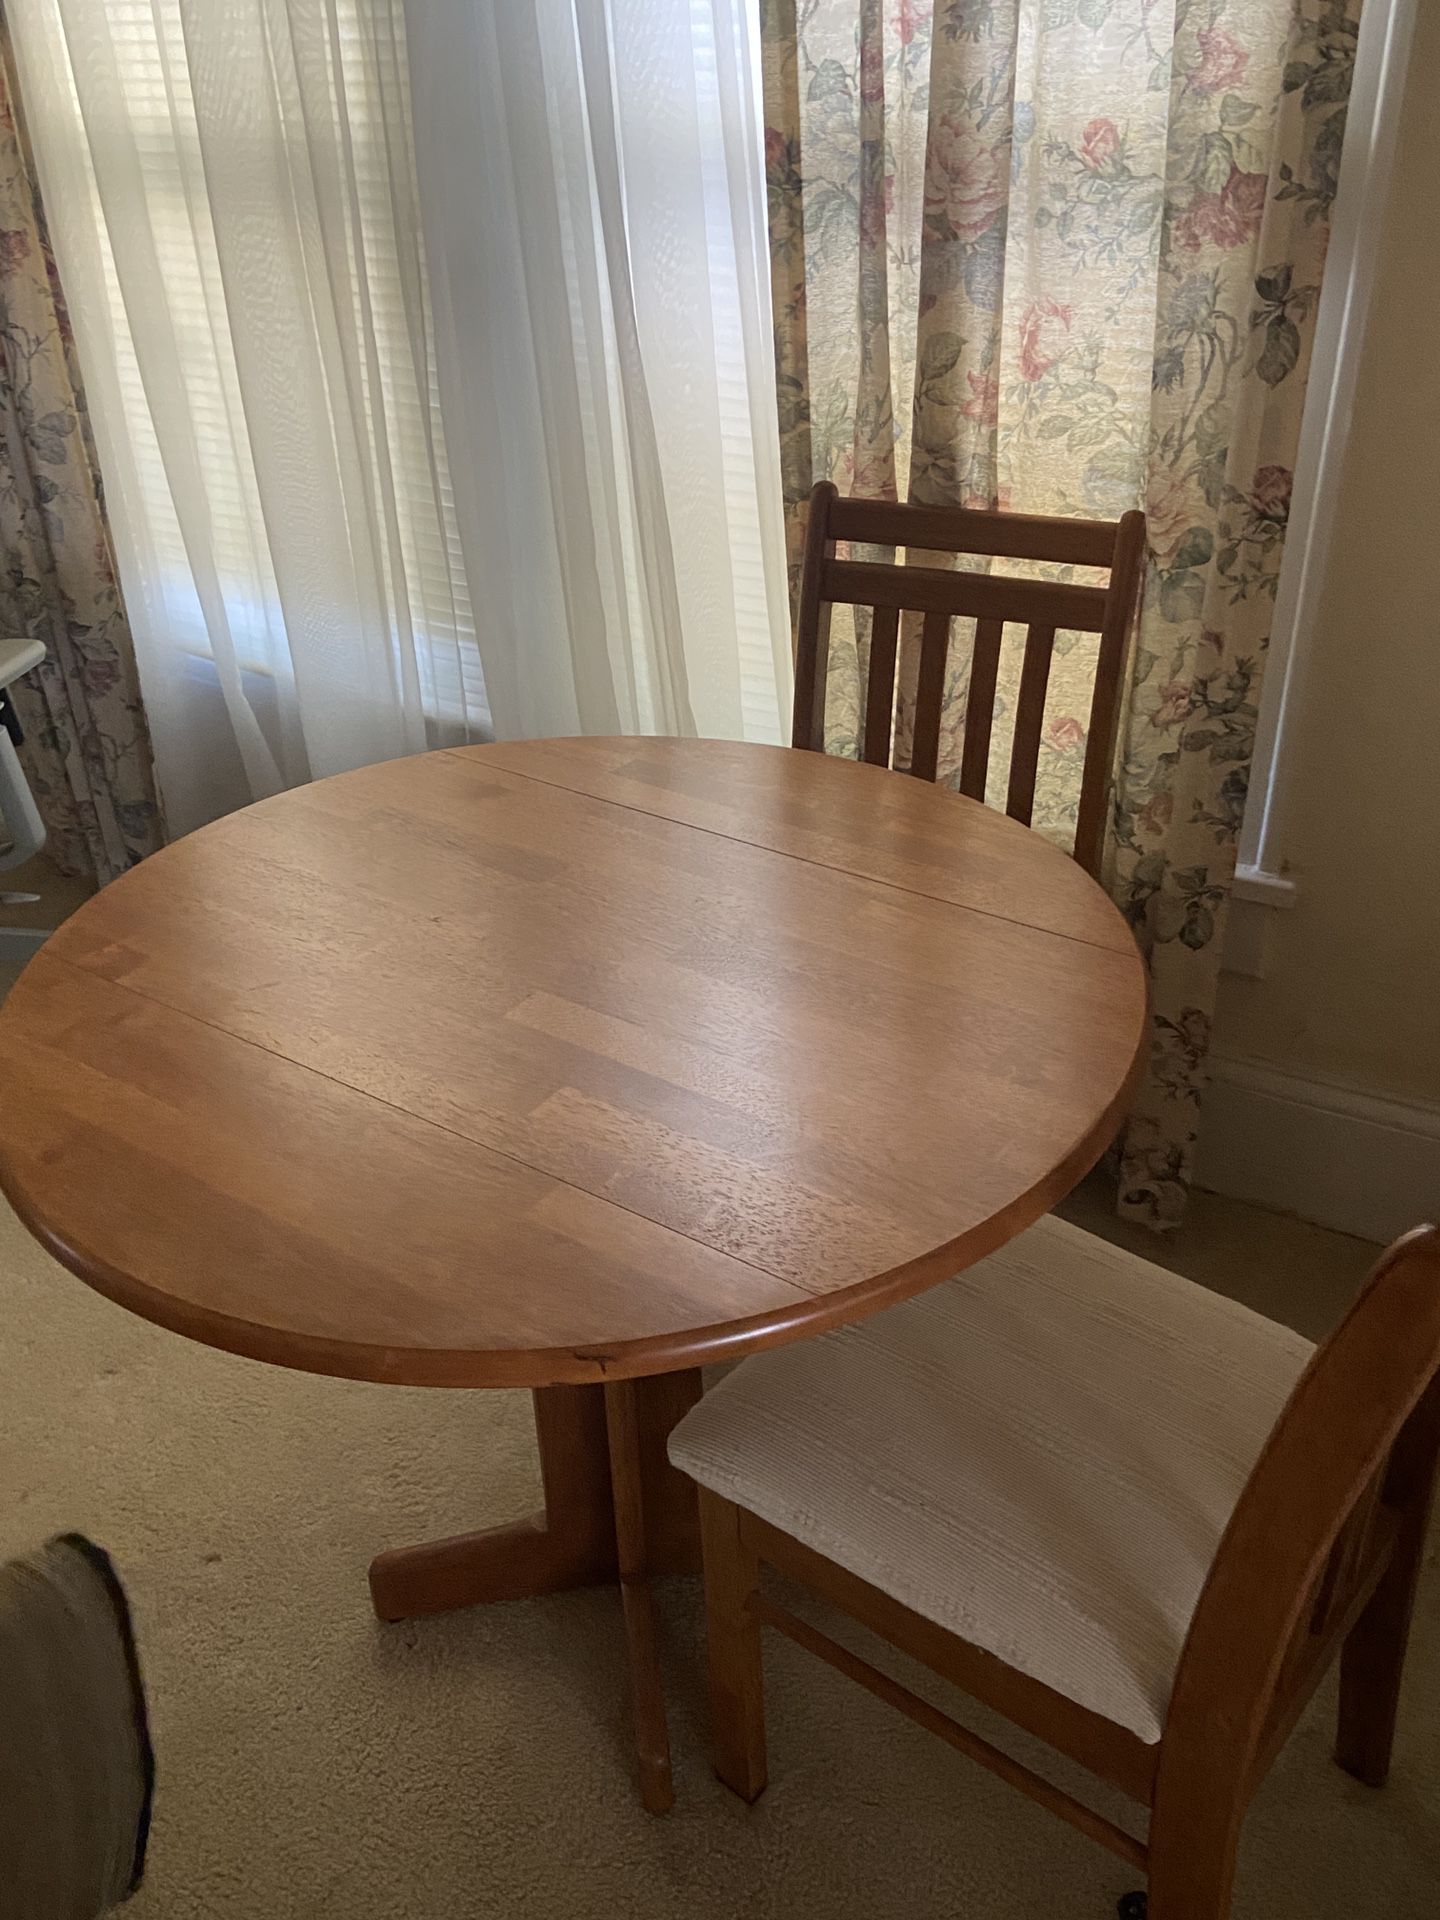 Kitchen Table With Two Chairs 